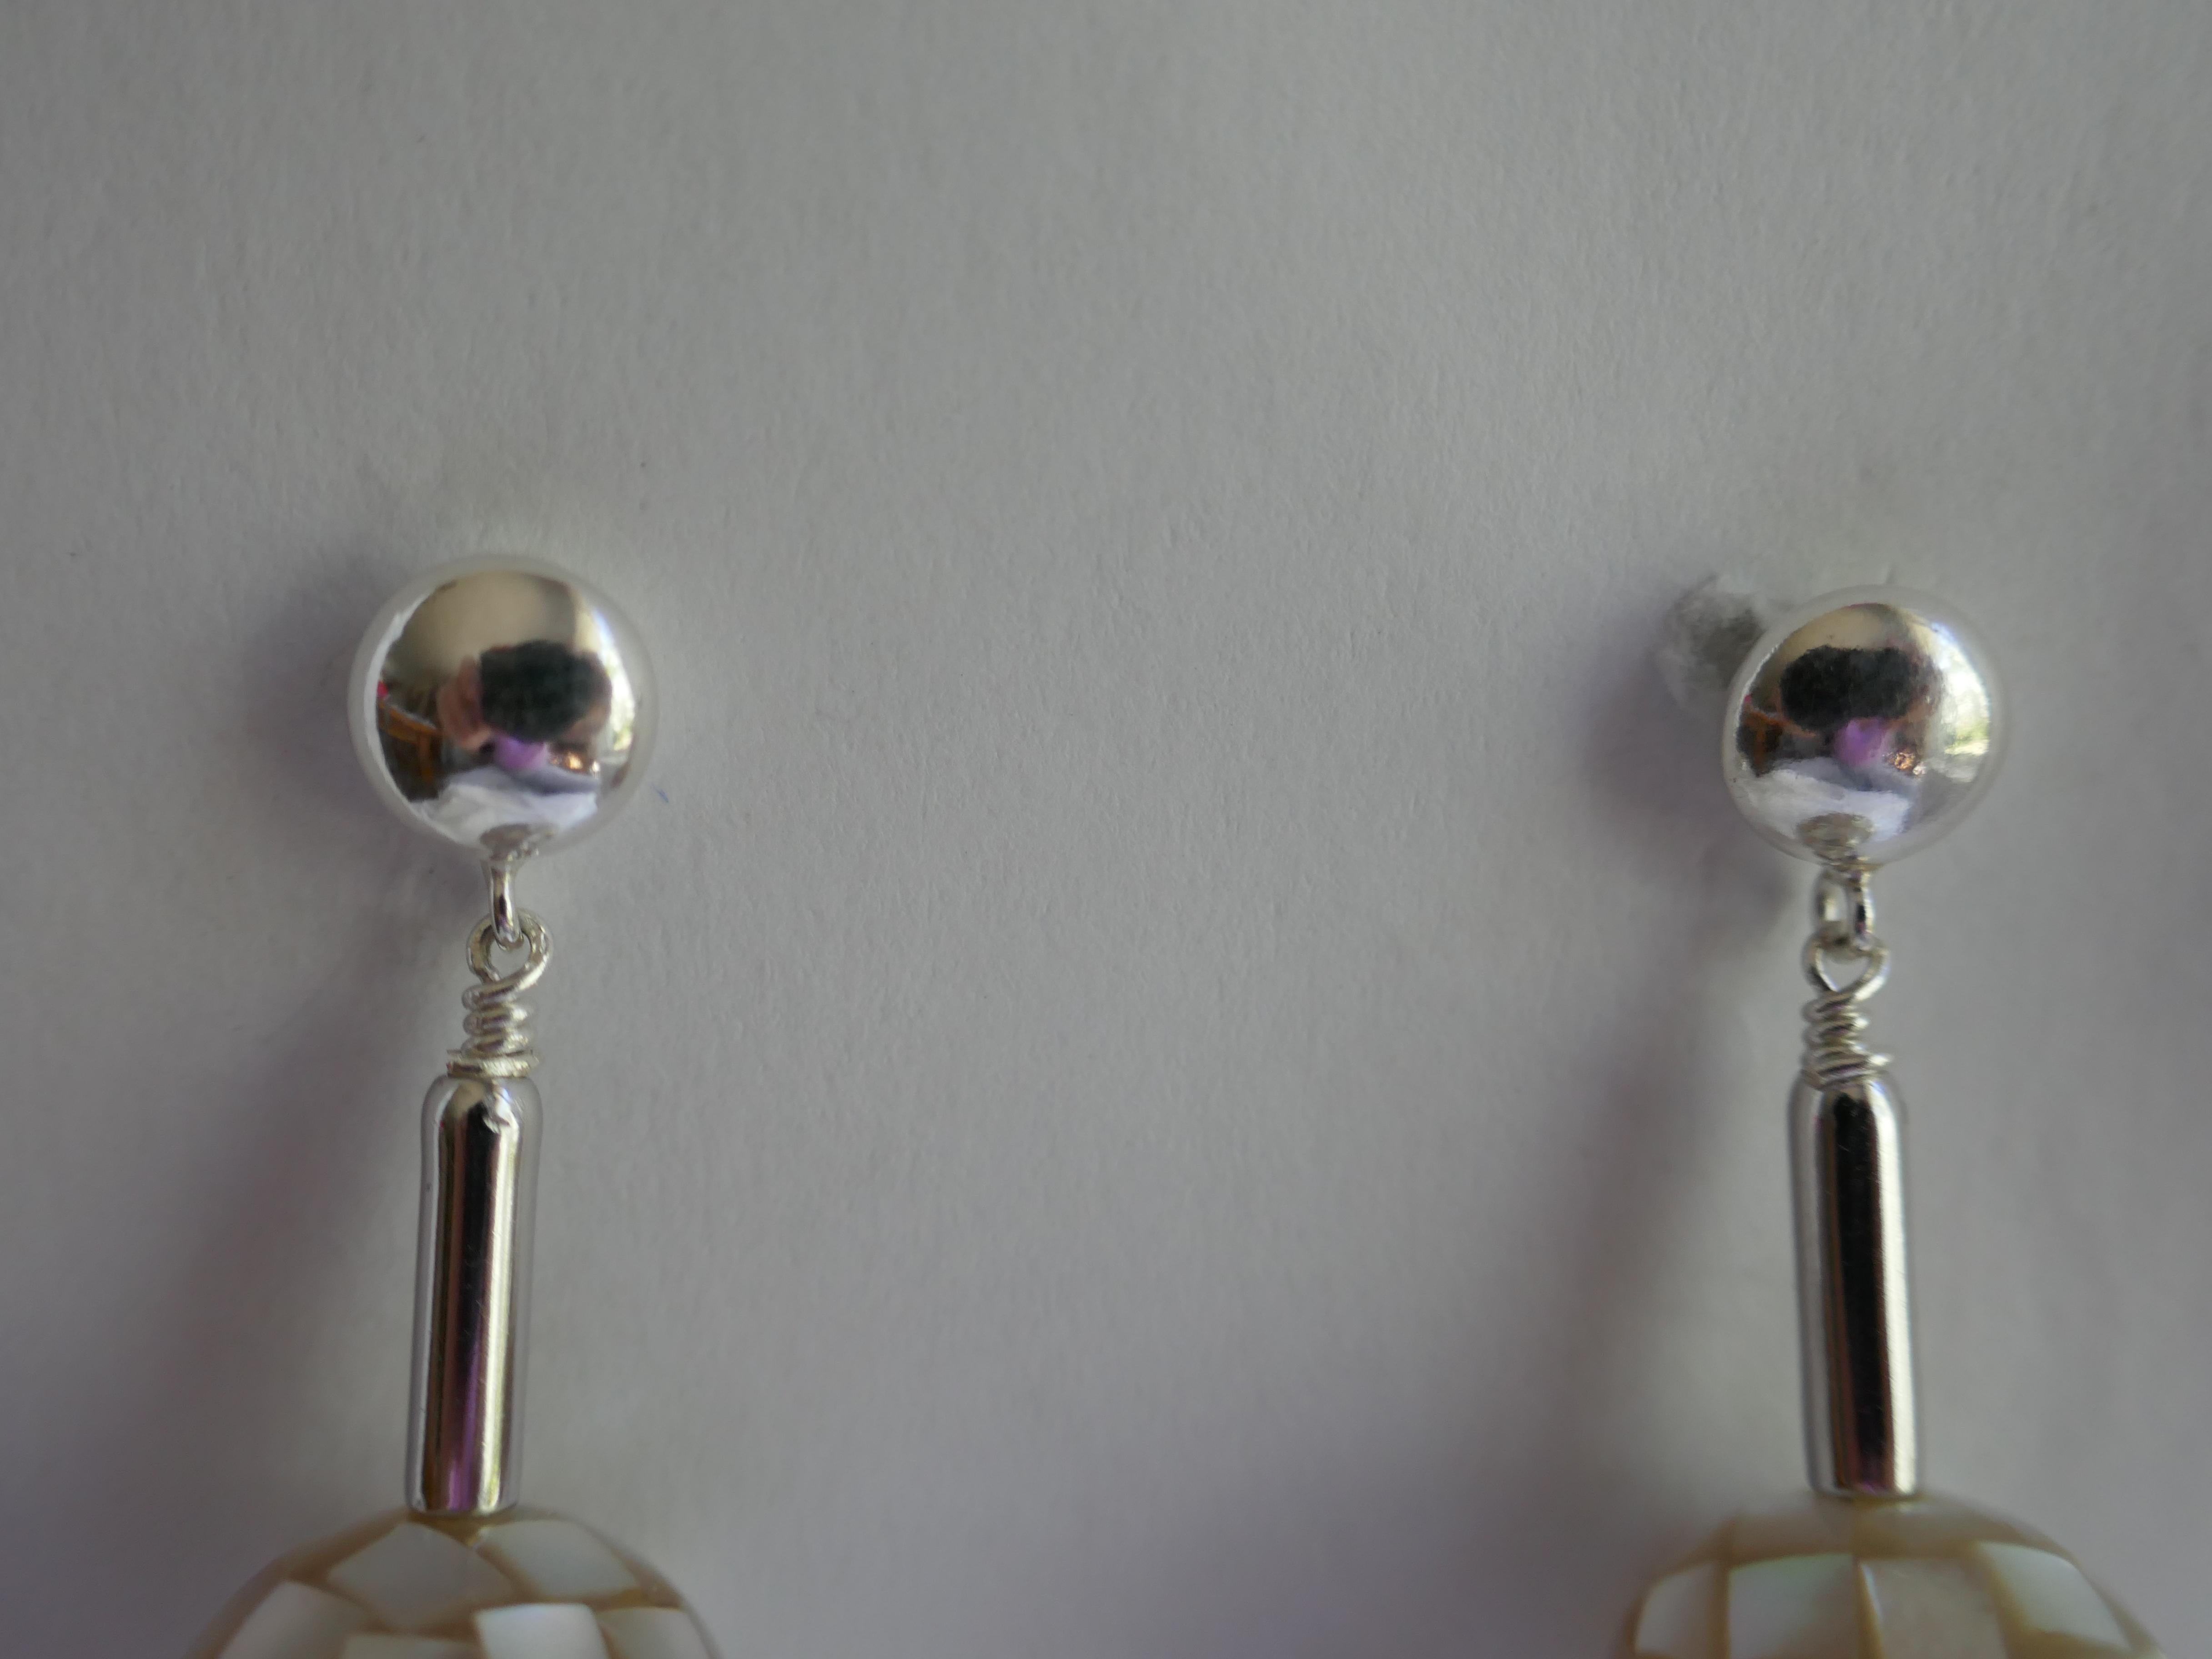 The earrings have 14mm platinum white mother of pearl beads that hang from 925 sterling silver tube and 7mm round post. The earring is 1 3/8 inches long. They look beautiful on. This is the pair you will be purchasing. Designed and created by Lucy